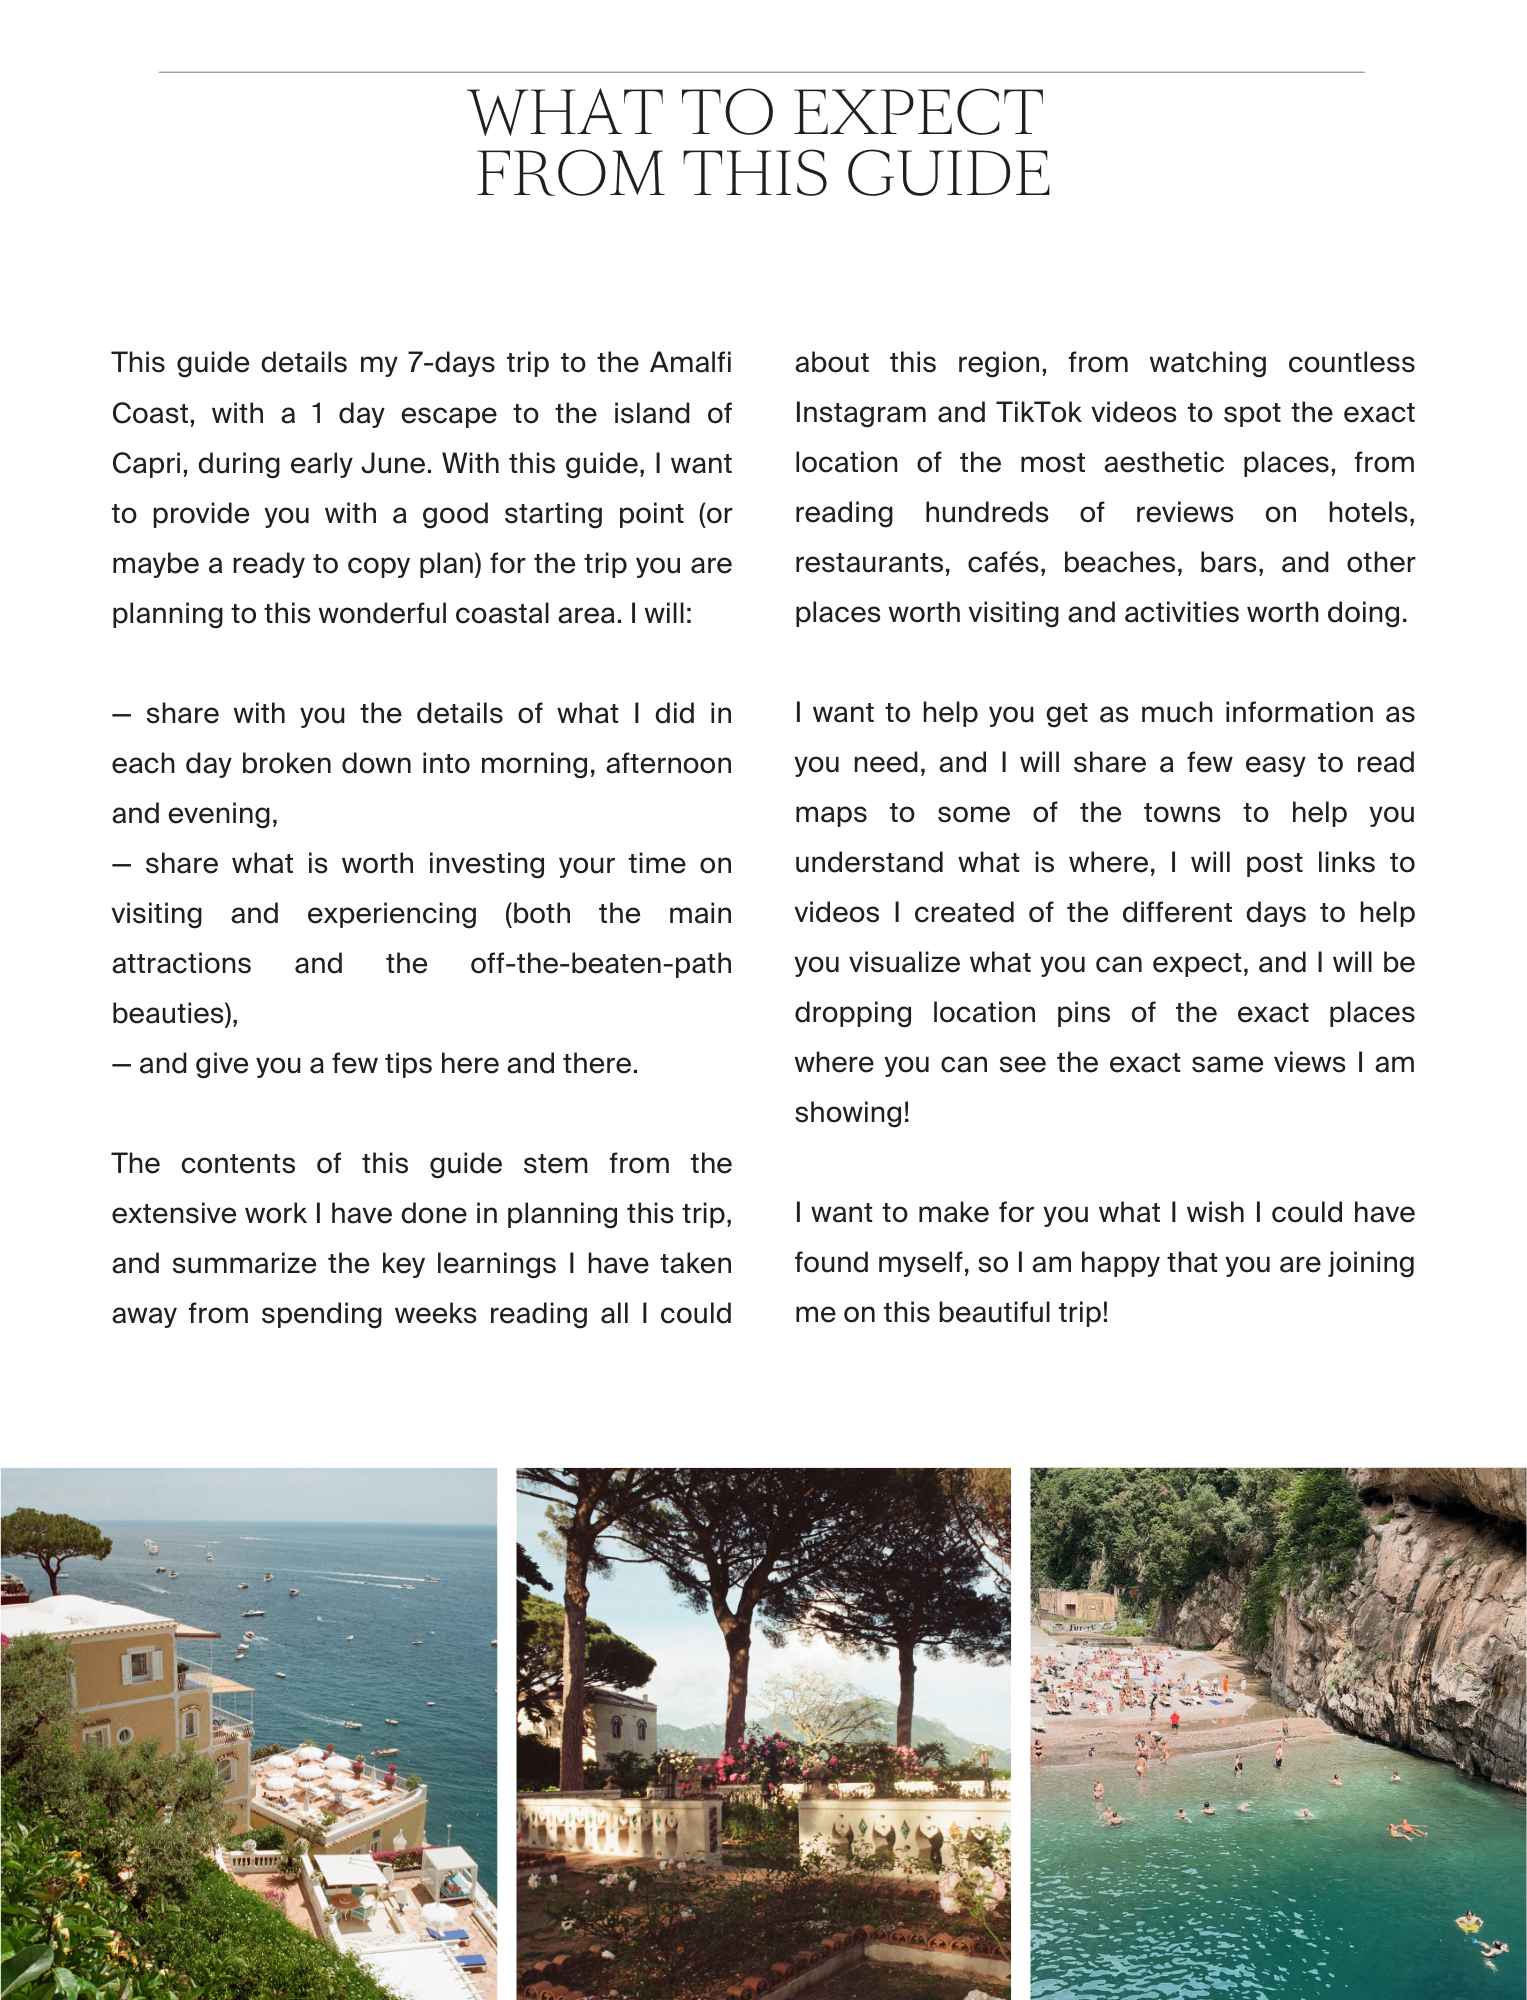 A Guide to the Amalfi Coast - the 'What to Expect' page, by Simply Slow Traveler